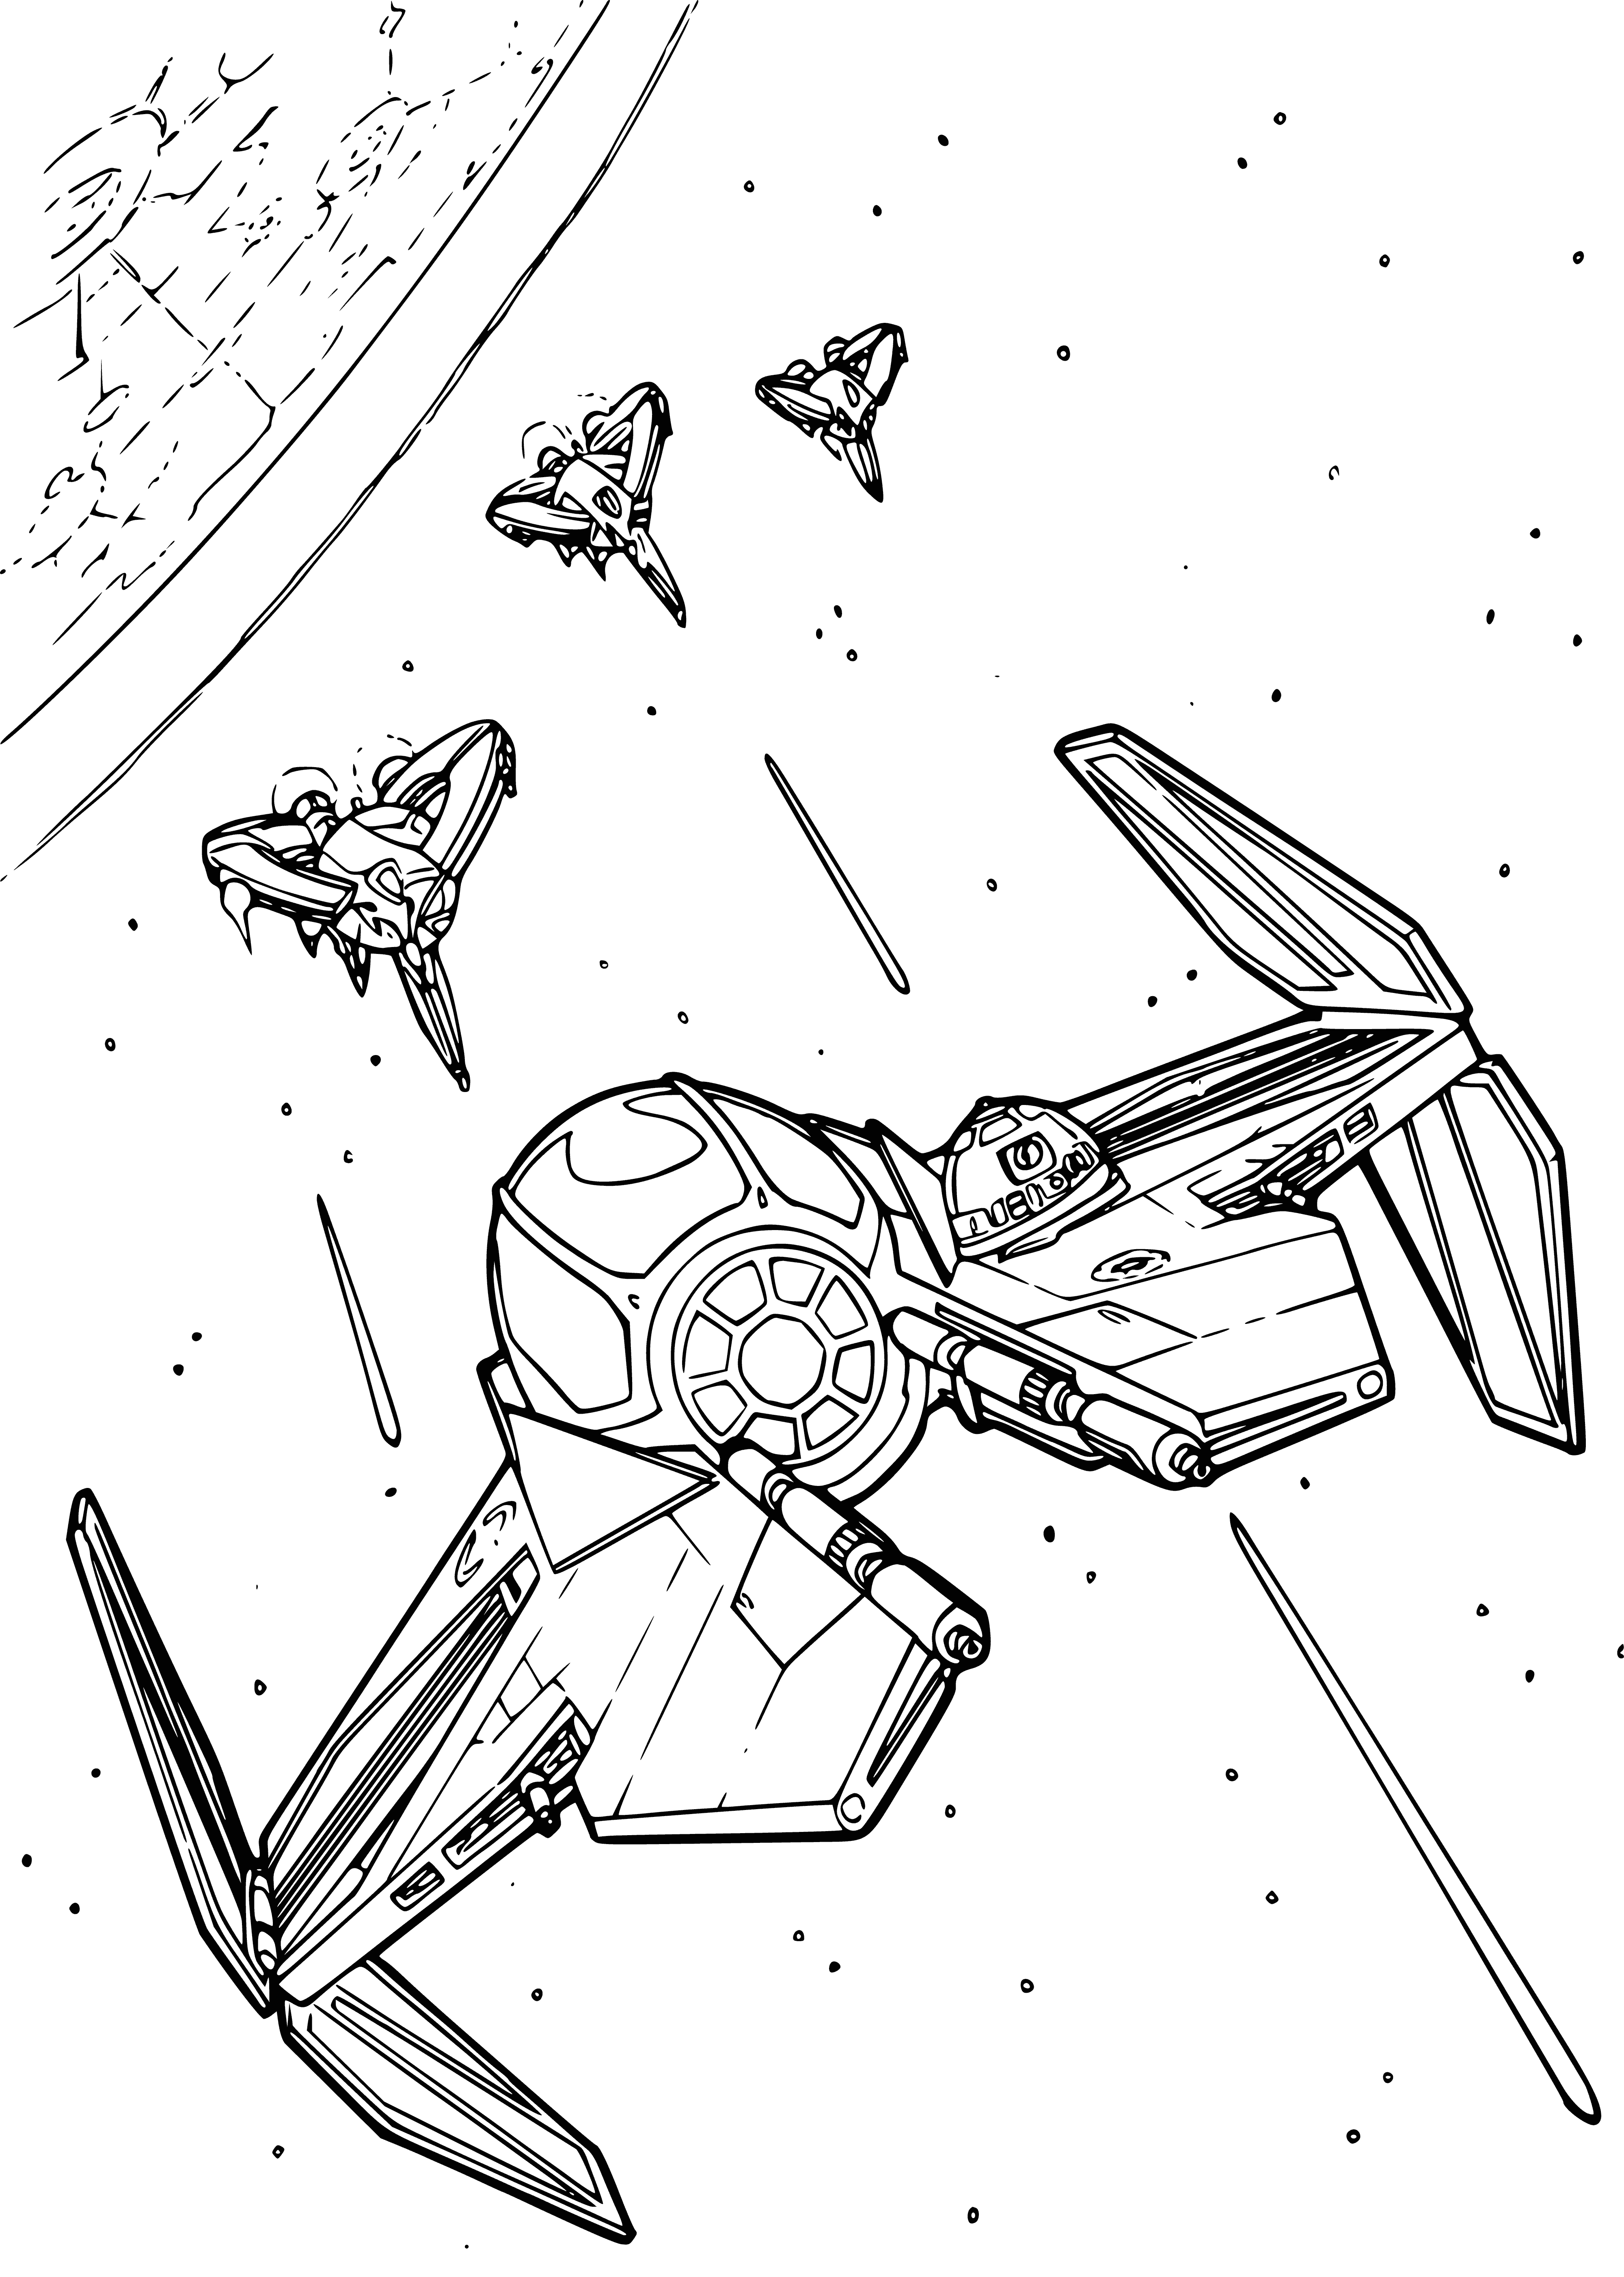 coloring page: Space battle coloring page: Two ships firing, small ships flying around, stars & planets in background.